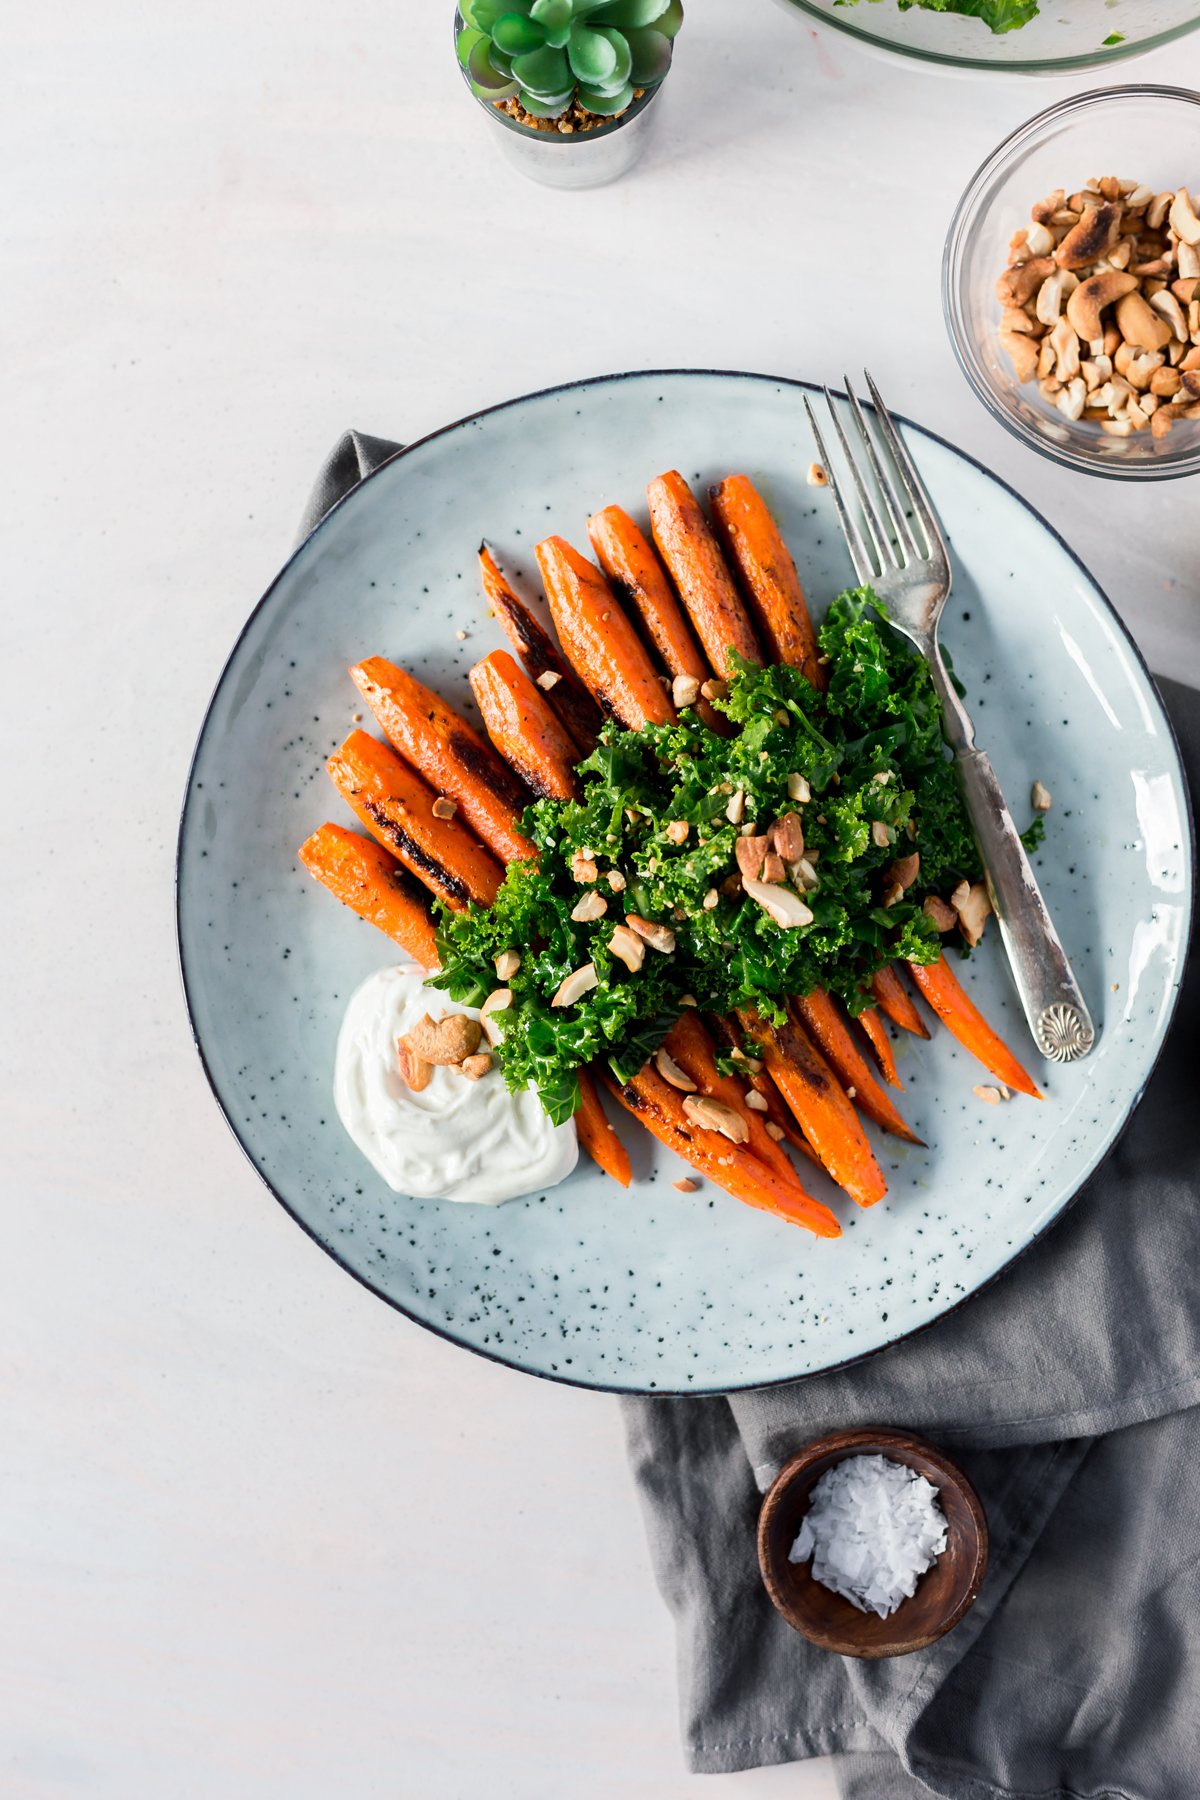 The perfect side dish to any meal, this roasted carrots and kale salad with za'atar seasoning will quickly become a family favorite at dinner! An easy recipes win! | asimplepantry.com